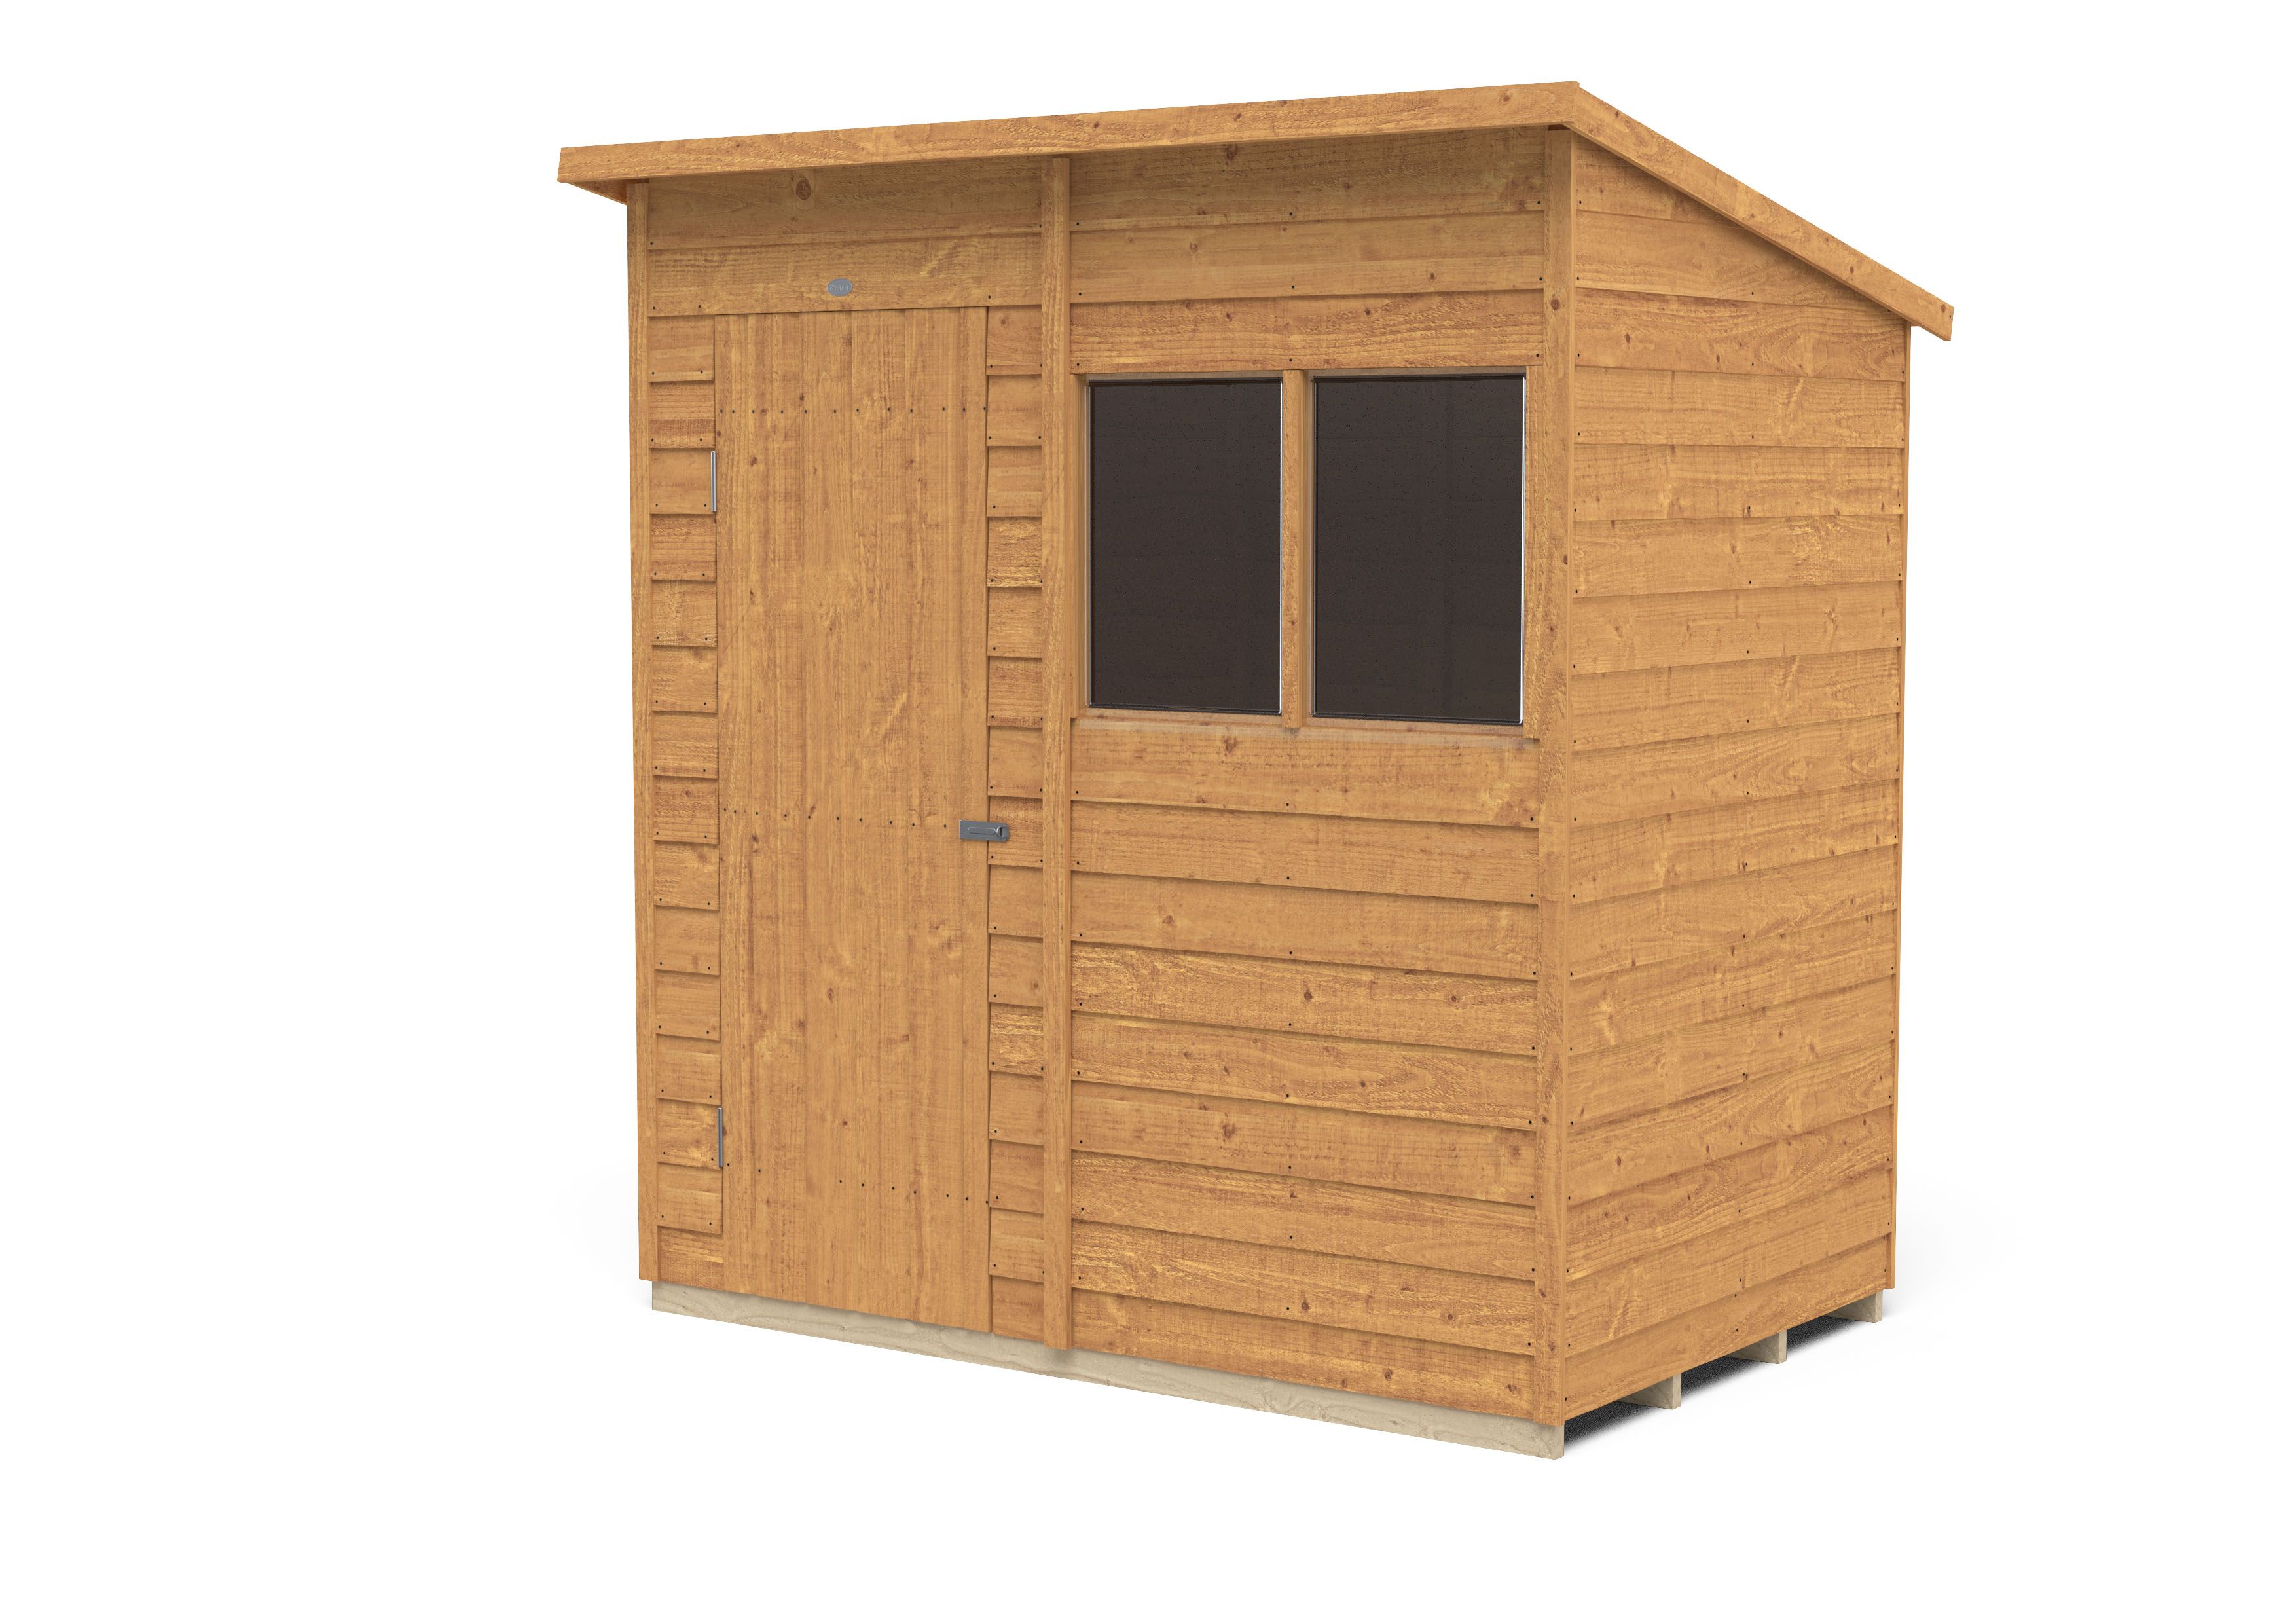 Forest Garden Overlap 6x4 ft Pent Wooden Dip treated Shed with floor & 2 windows